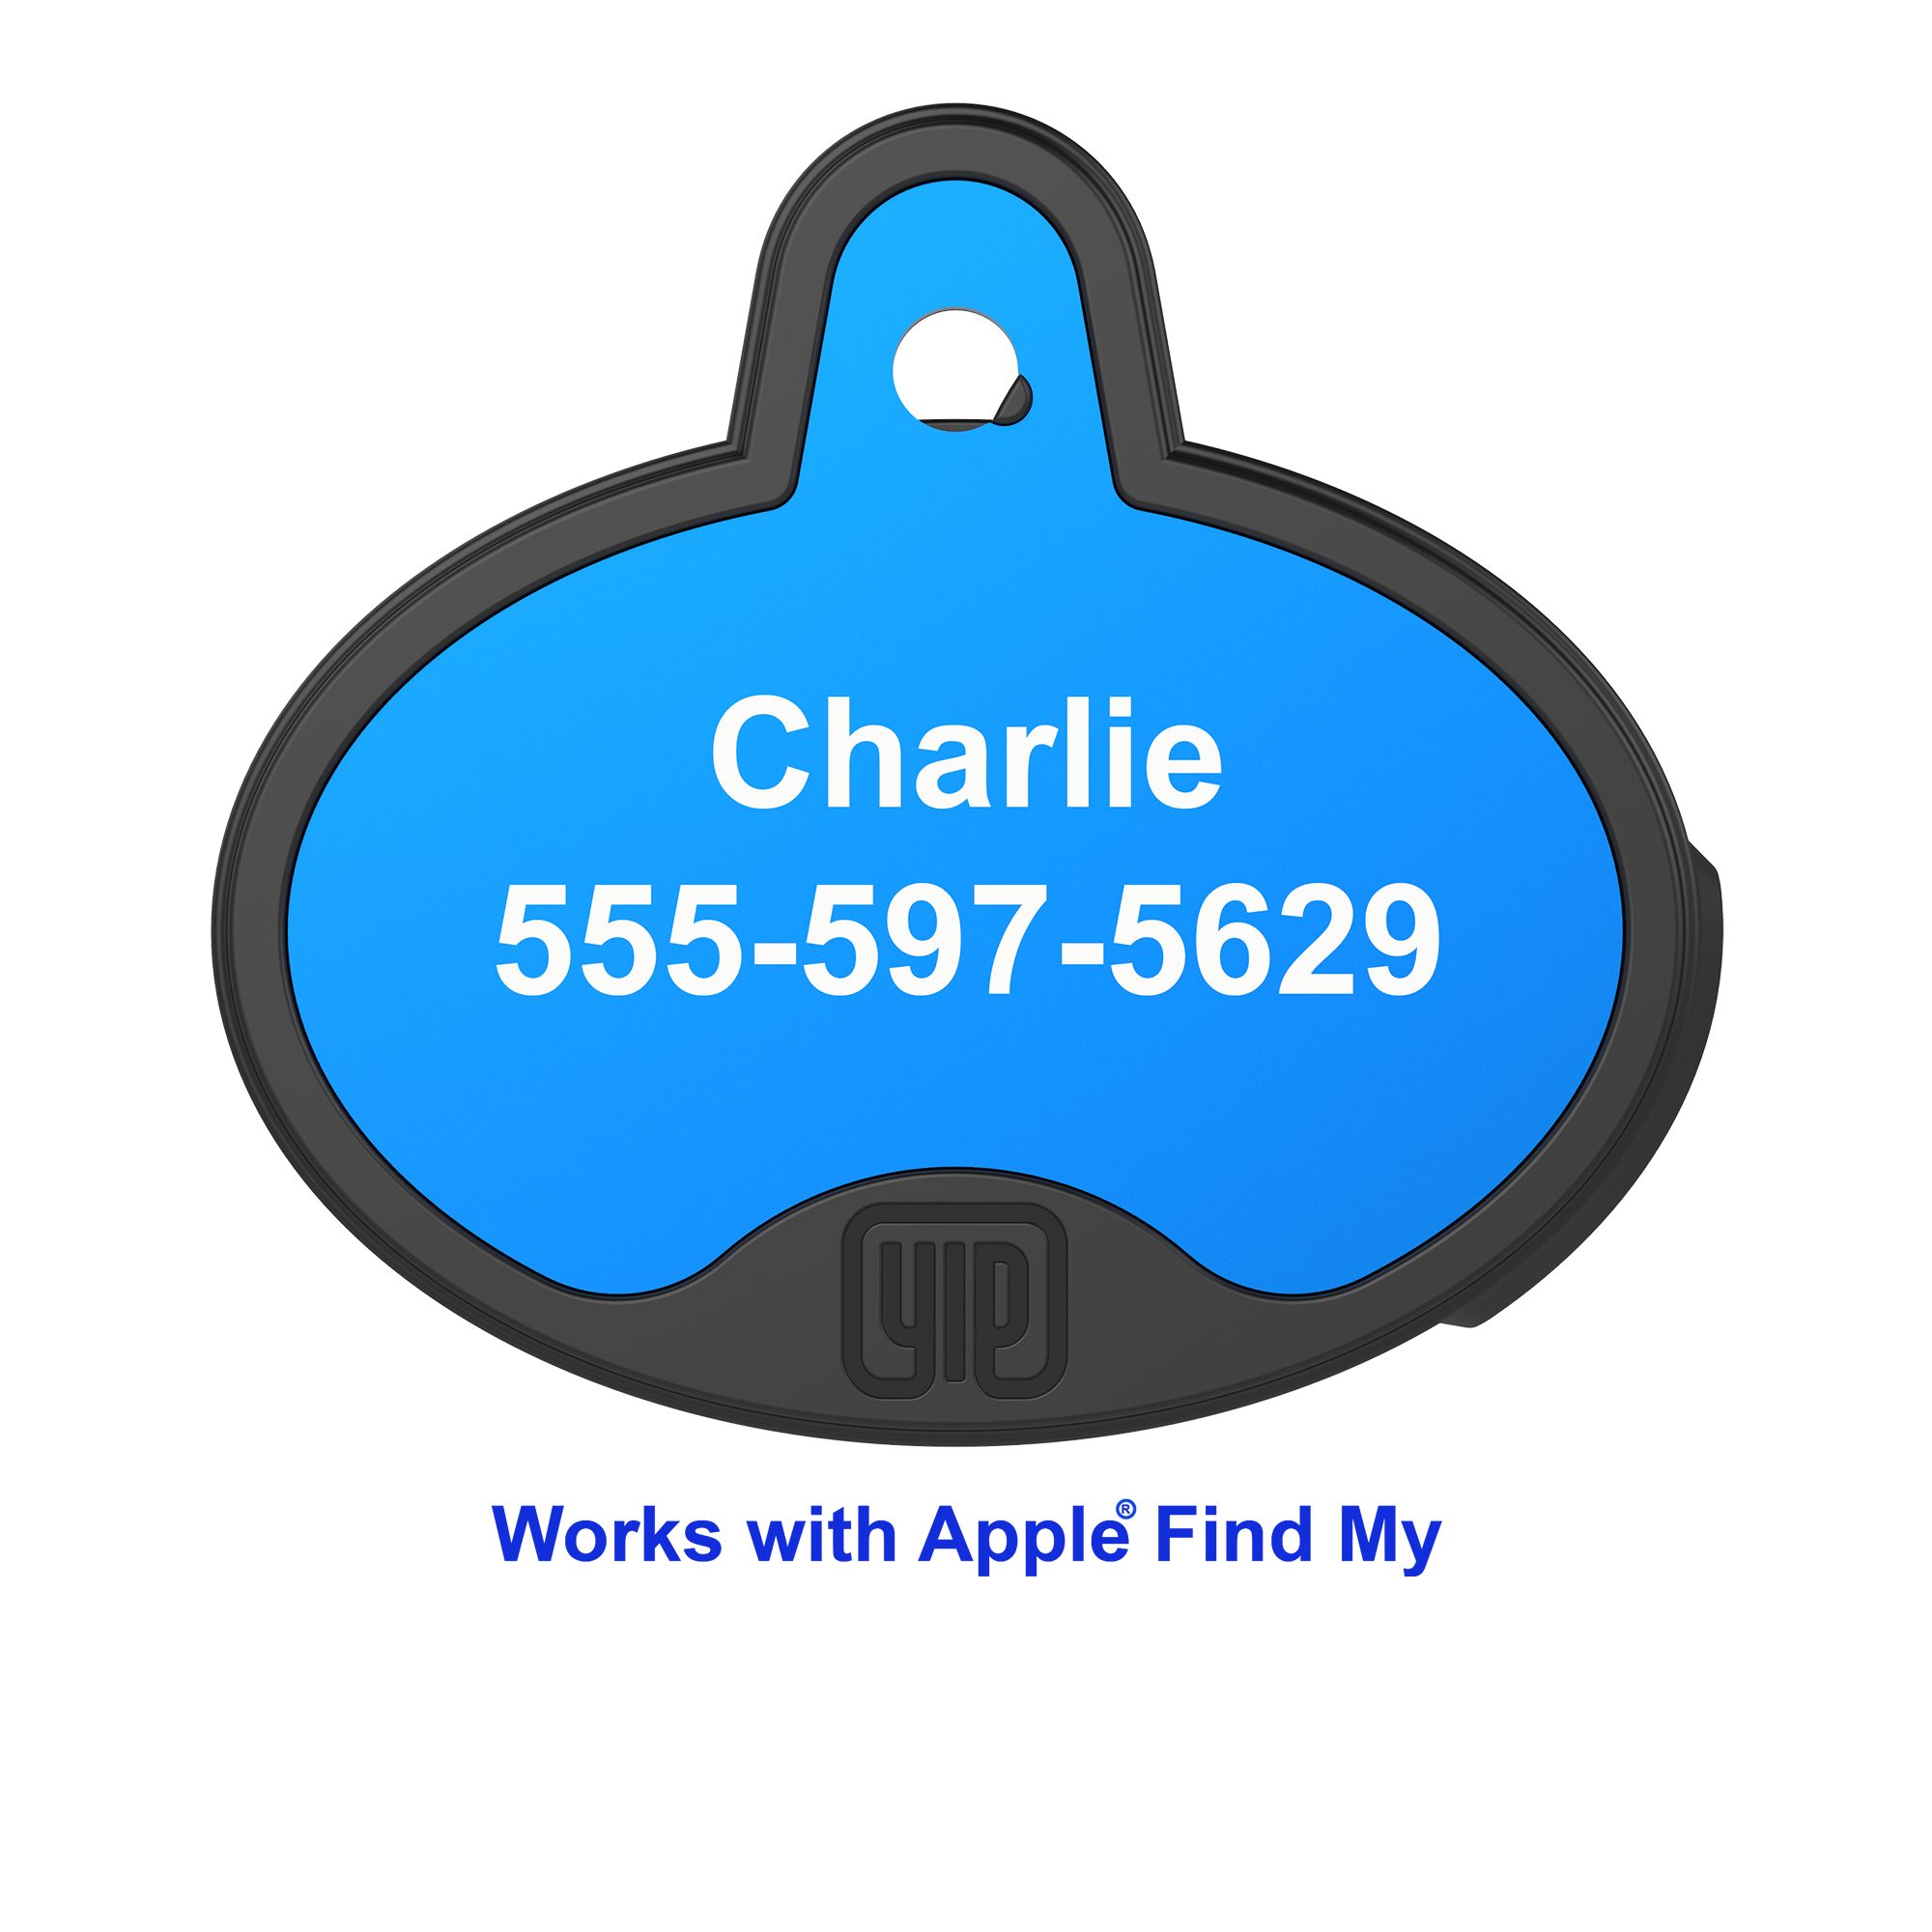 First dedicated dog tag with Find My now available (but there are